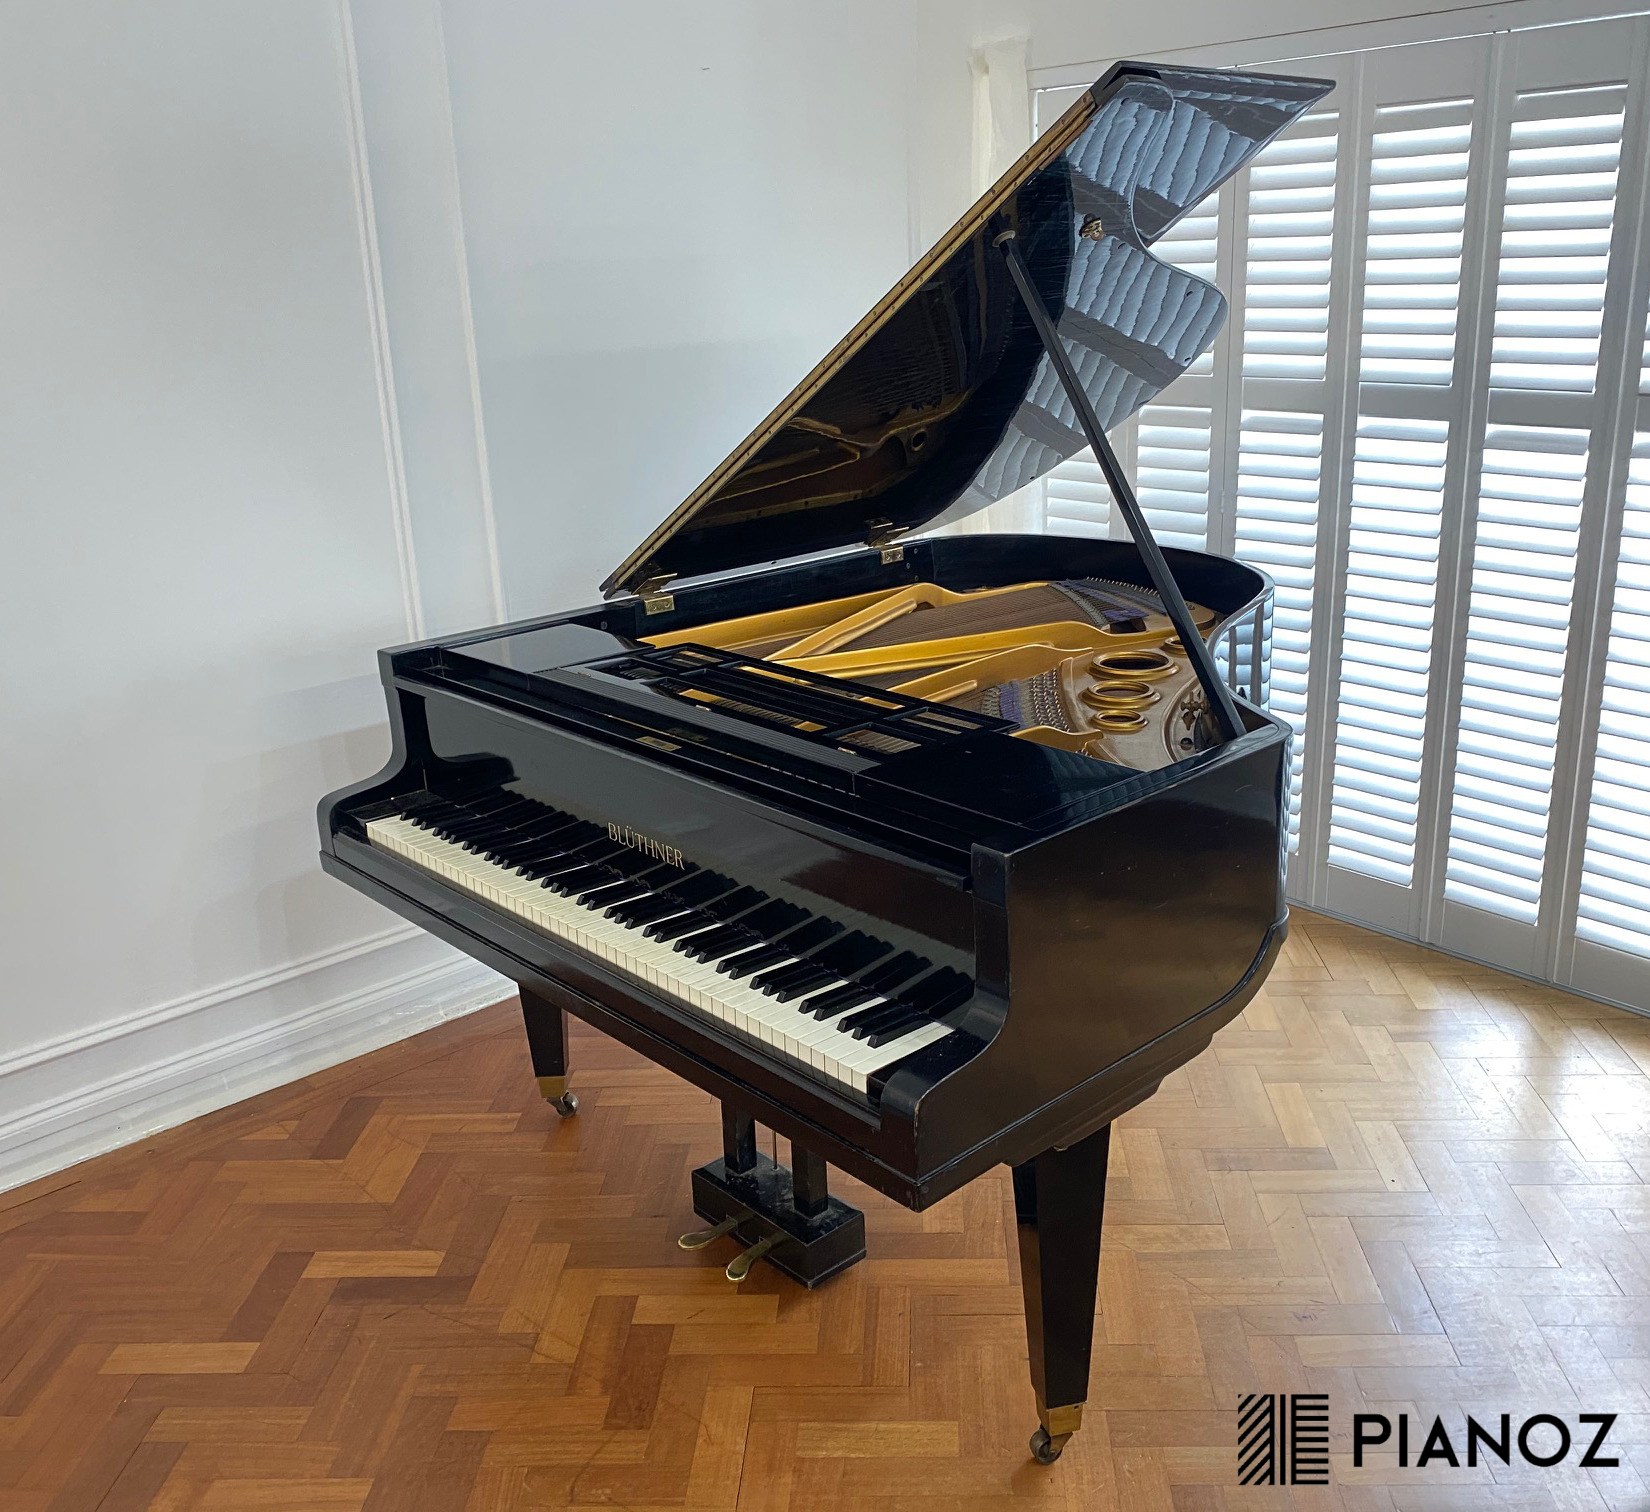 Bluthner Style 5 Roller Action Baby Grand Piano piano for sale in UK